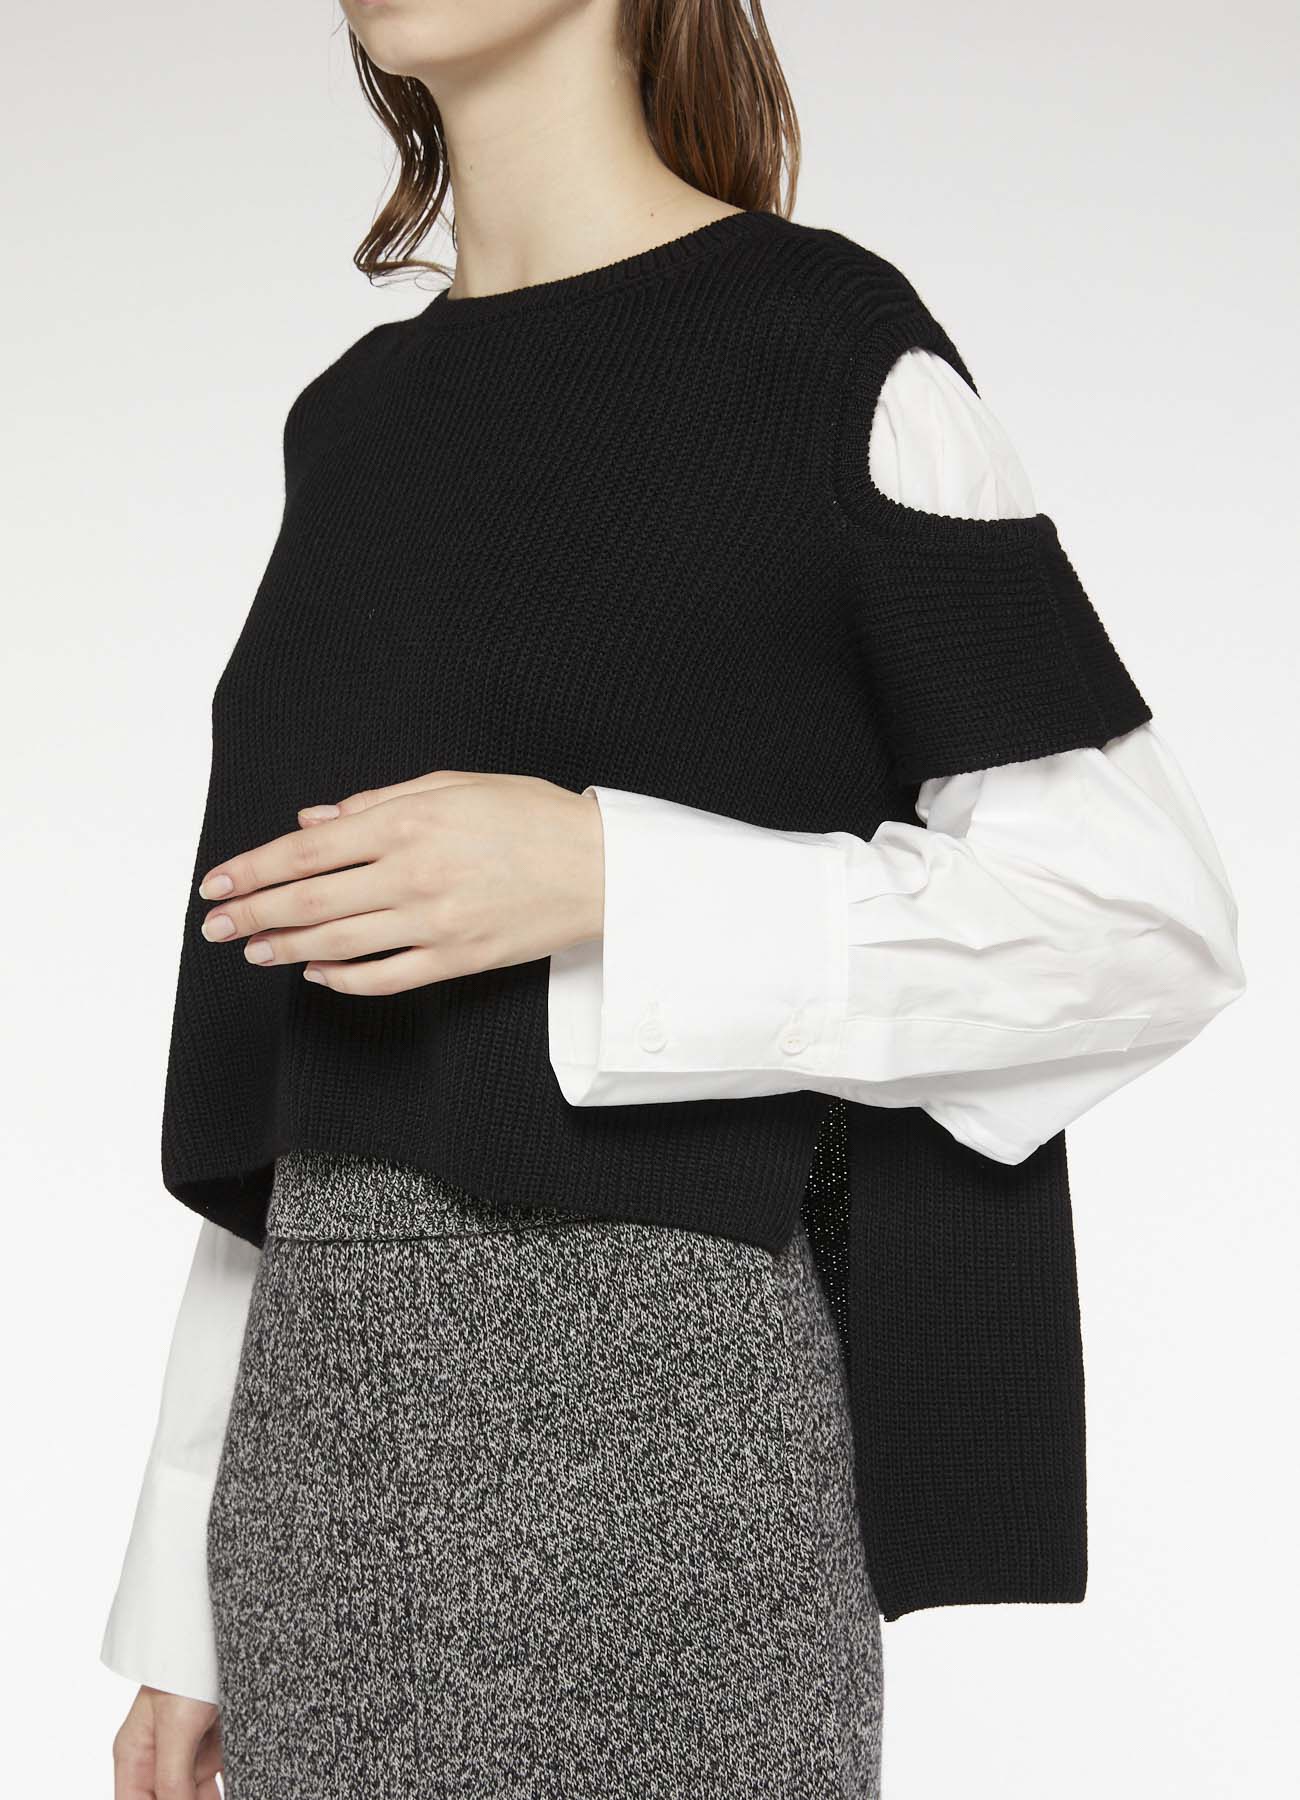 RISMATbyY's WOOL HALF SHOULDER HOLE PULL OVER WITH SHIRT